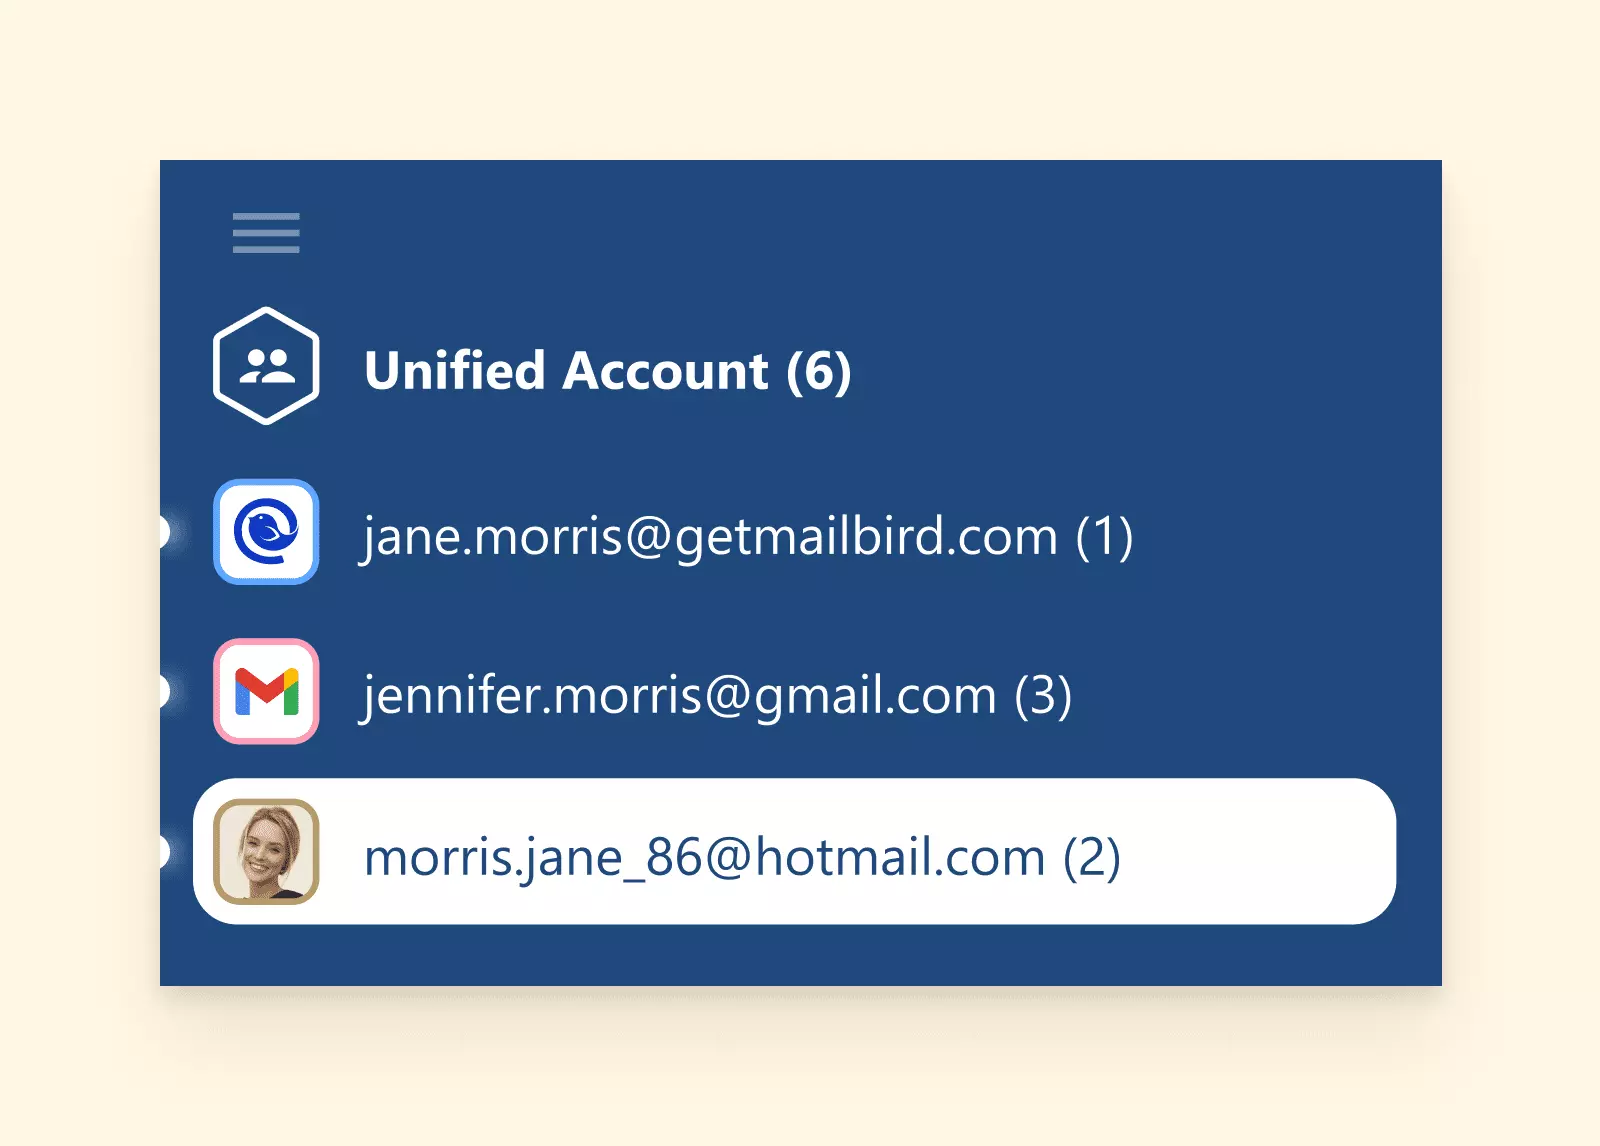 Unified accounts in the Mailbird email client